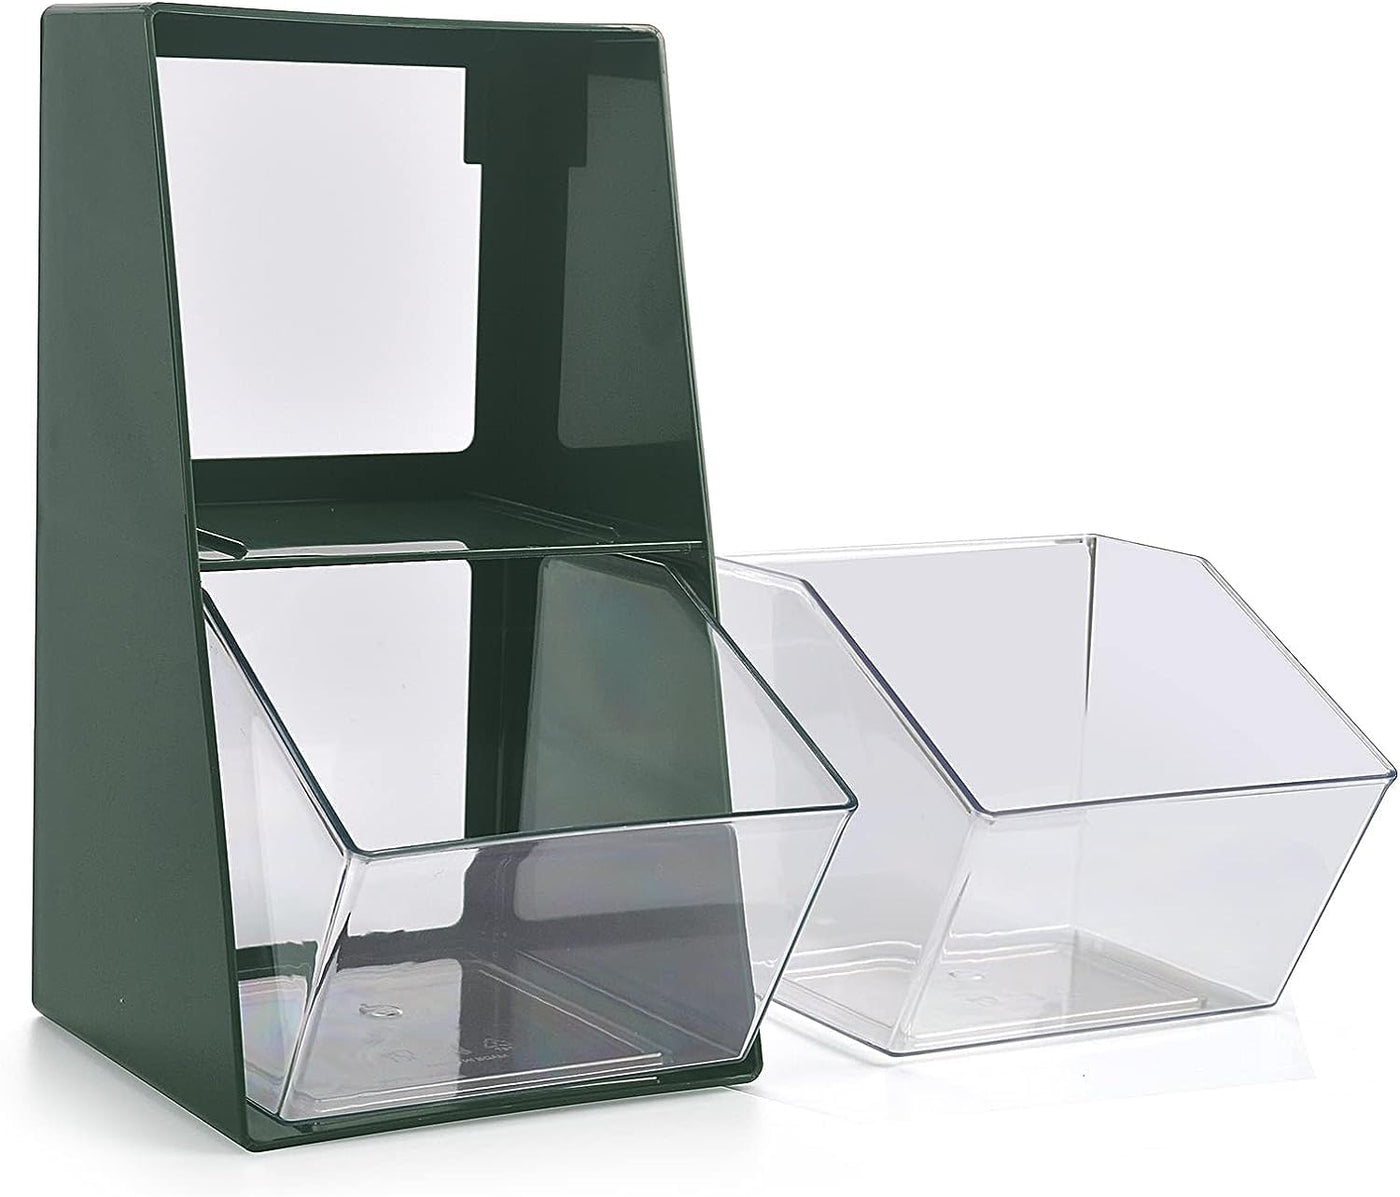 Detachable Storage Containers Box with 2 Compartments Drawers - (Green)